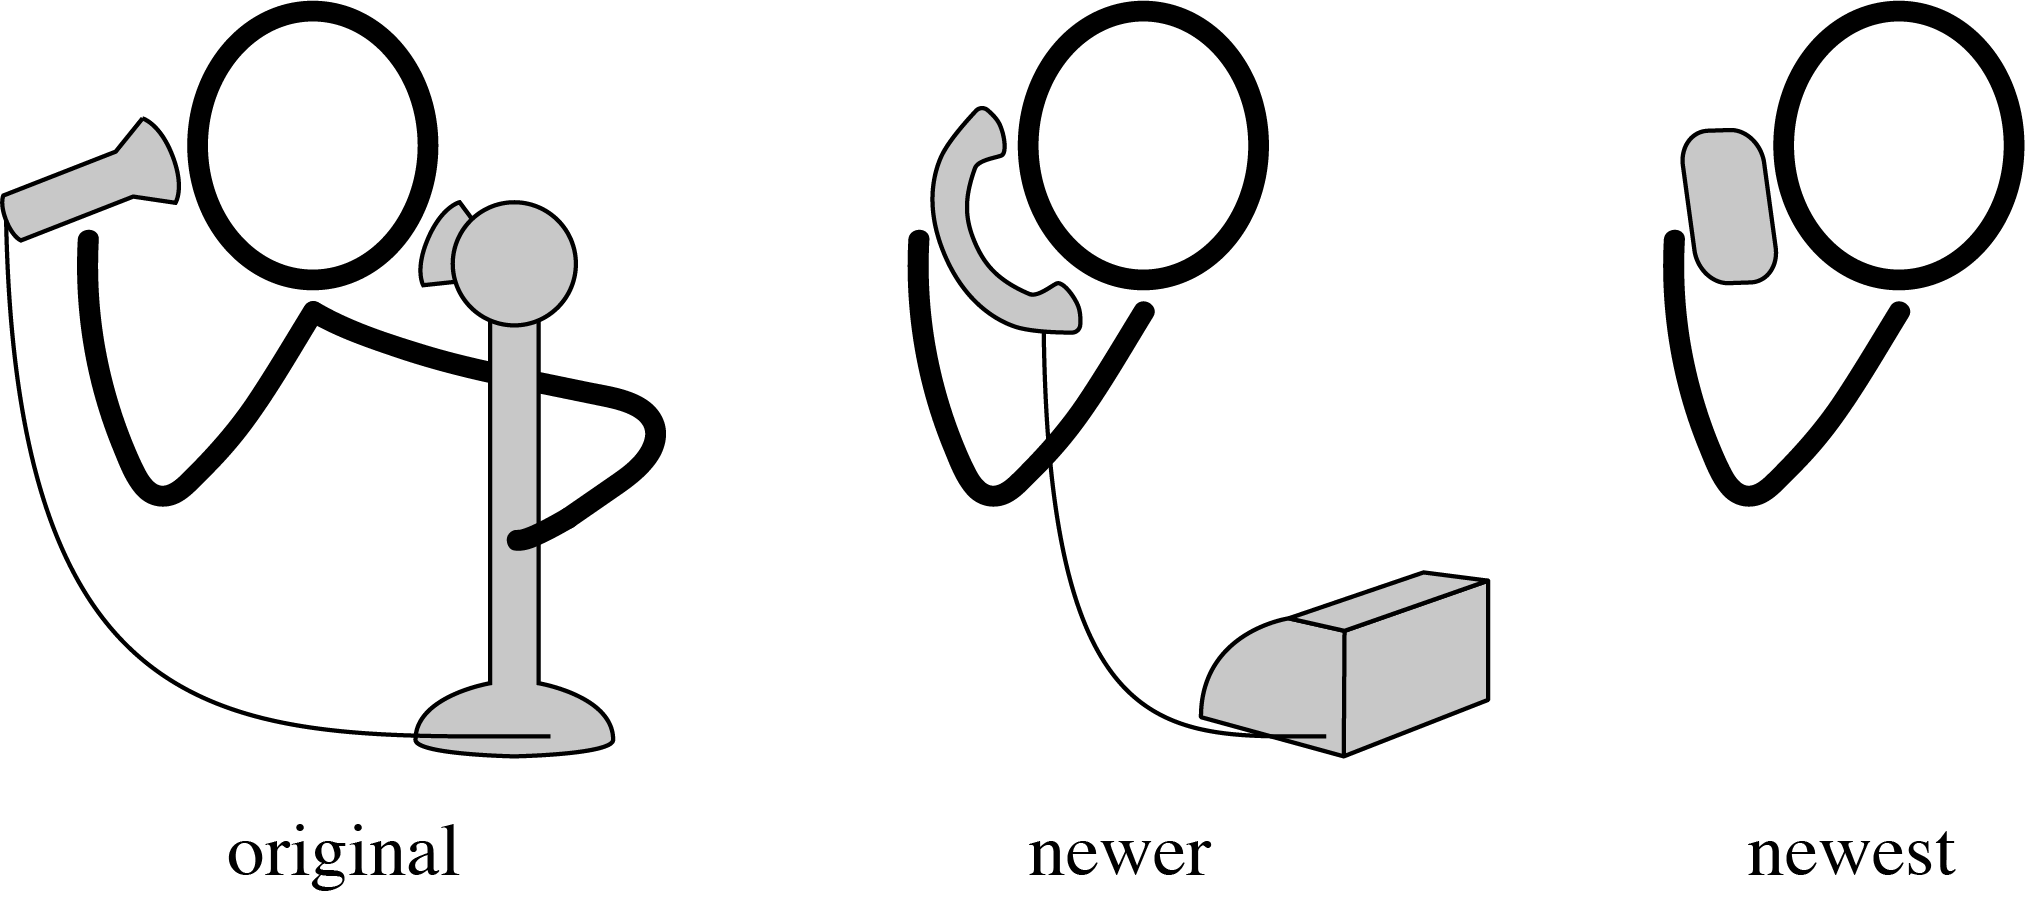 Three versions of the telephone. The first labelled "original" is a candlestick shape with separate earpiece requiring two hands. The second labelled "newer" is a one-handed handset with both speaker and microphone on the same piece. The third labelled "newest" is a small rectangular smartphone.